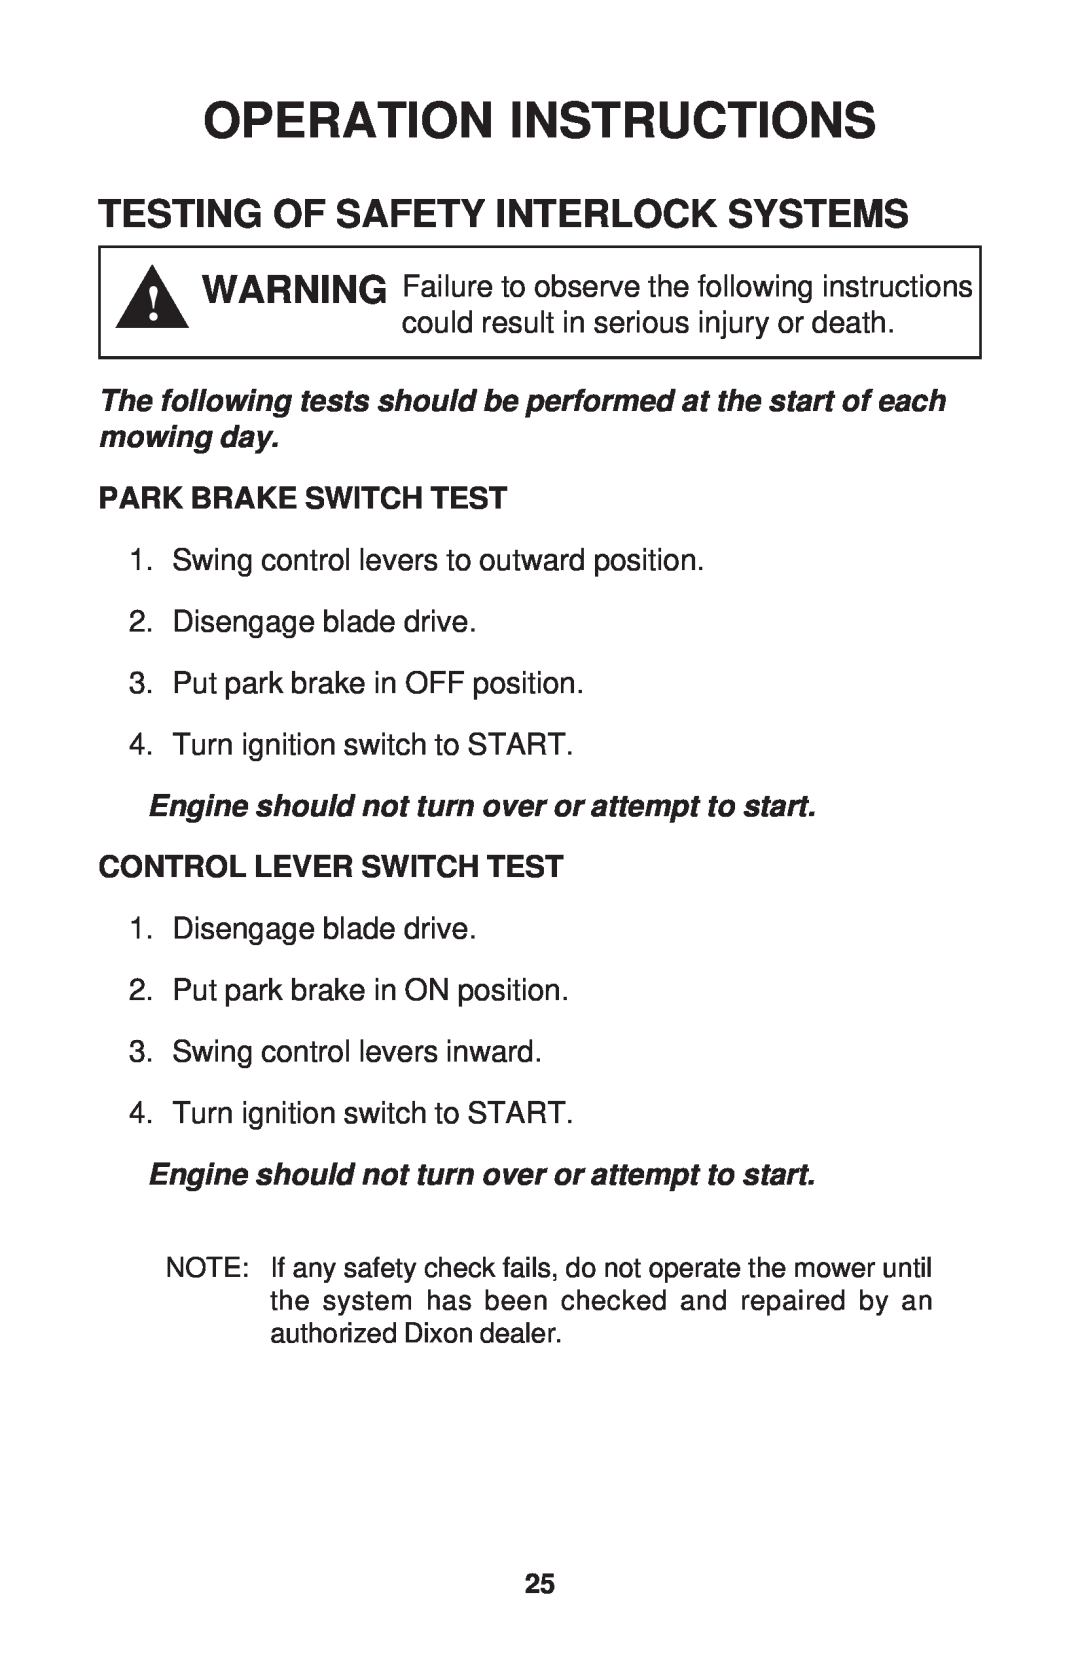 Dixon ZTR 34, ZTR 44, ZTR 34 manual Testing Of Safety Interlock Systems, Operation Instructions, Park Brake Switch Test 